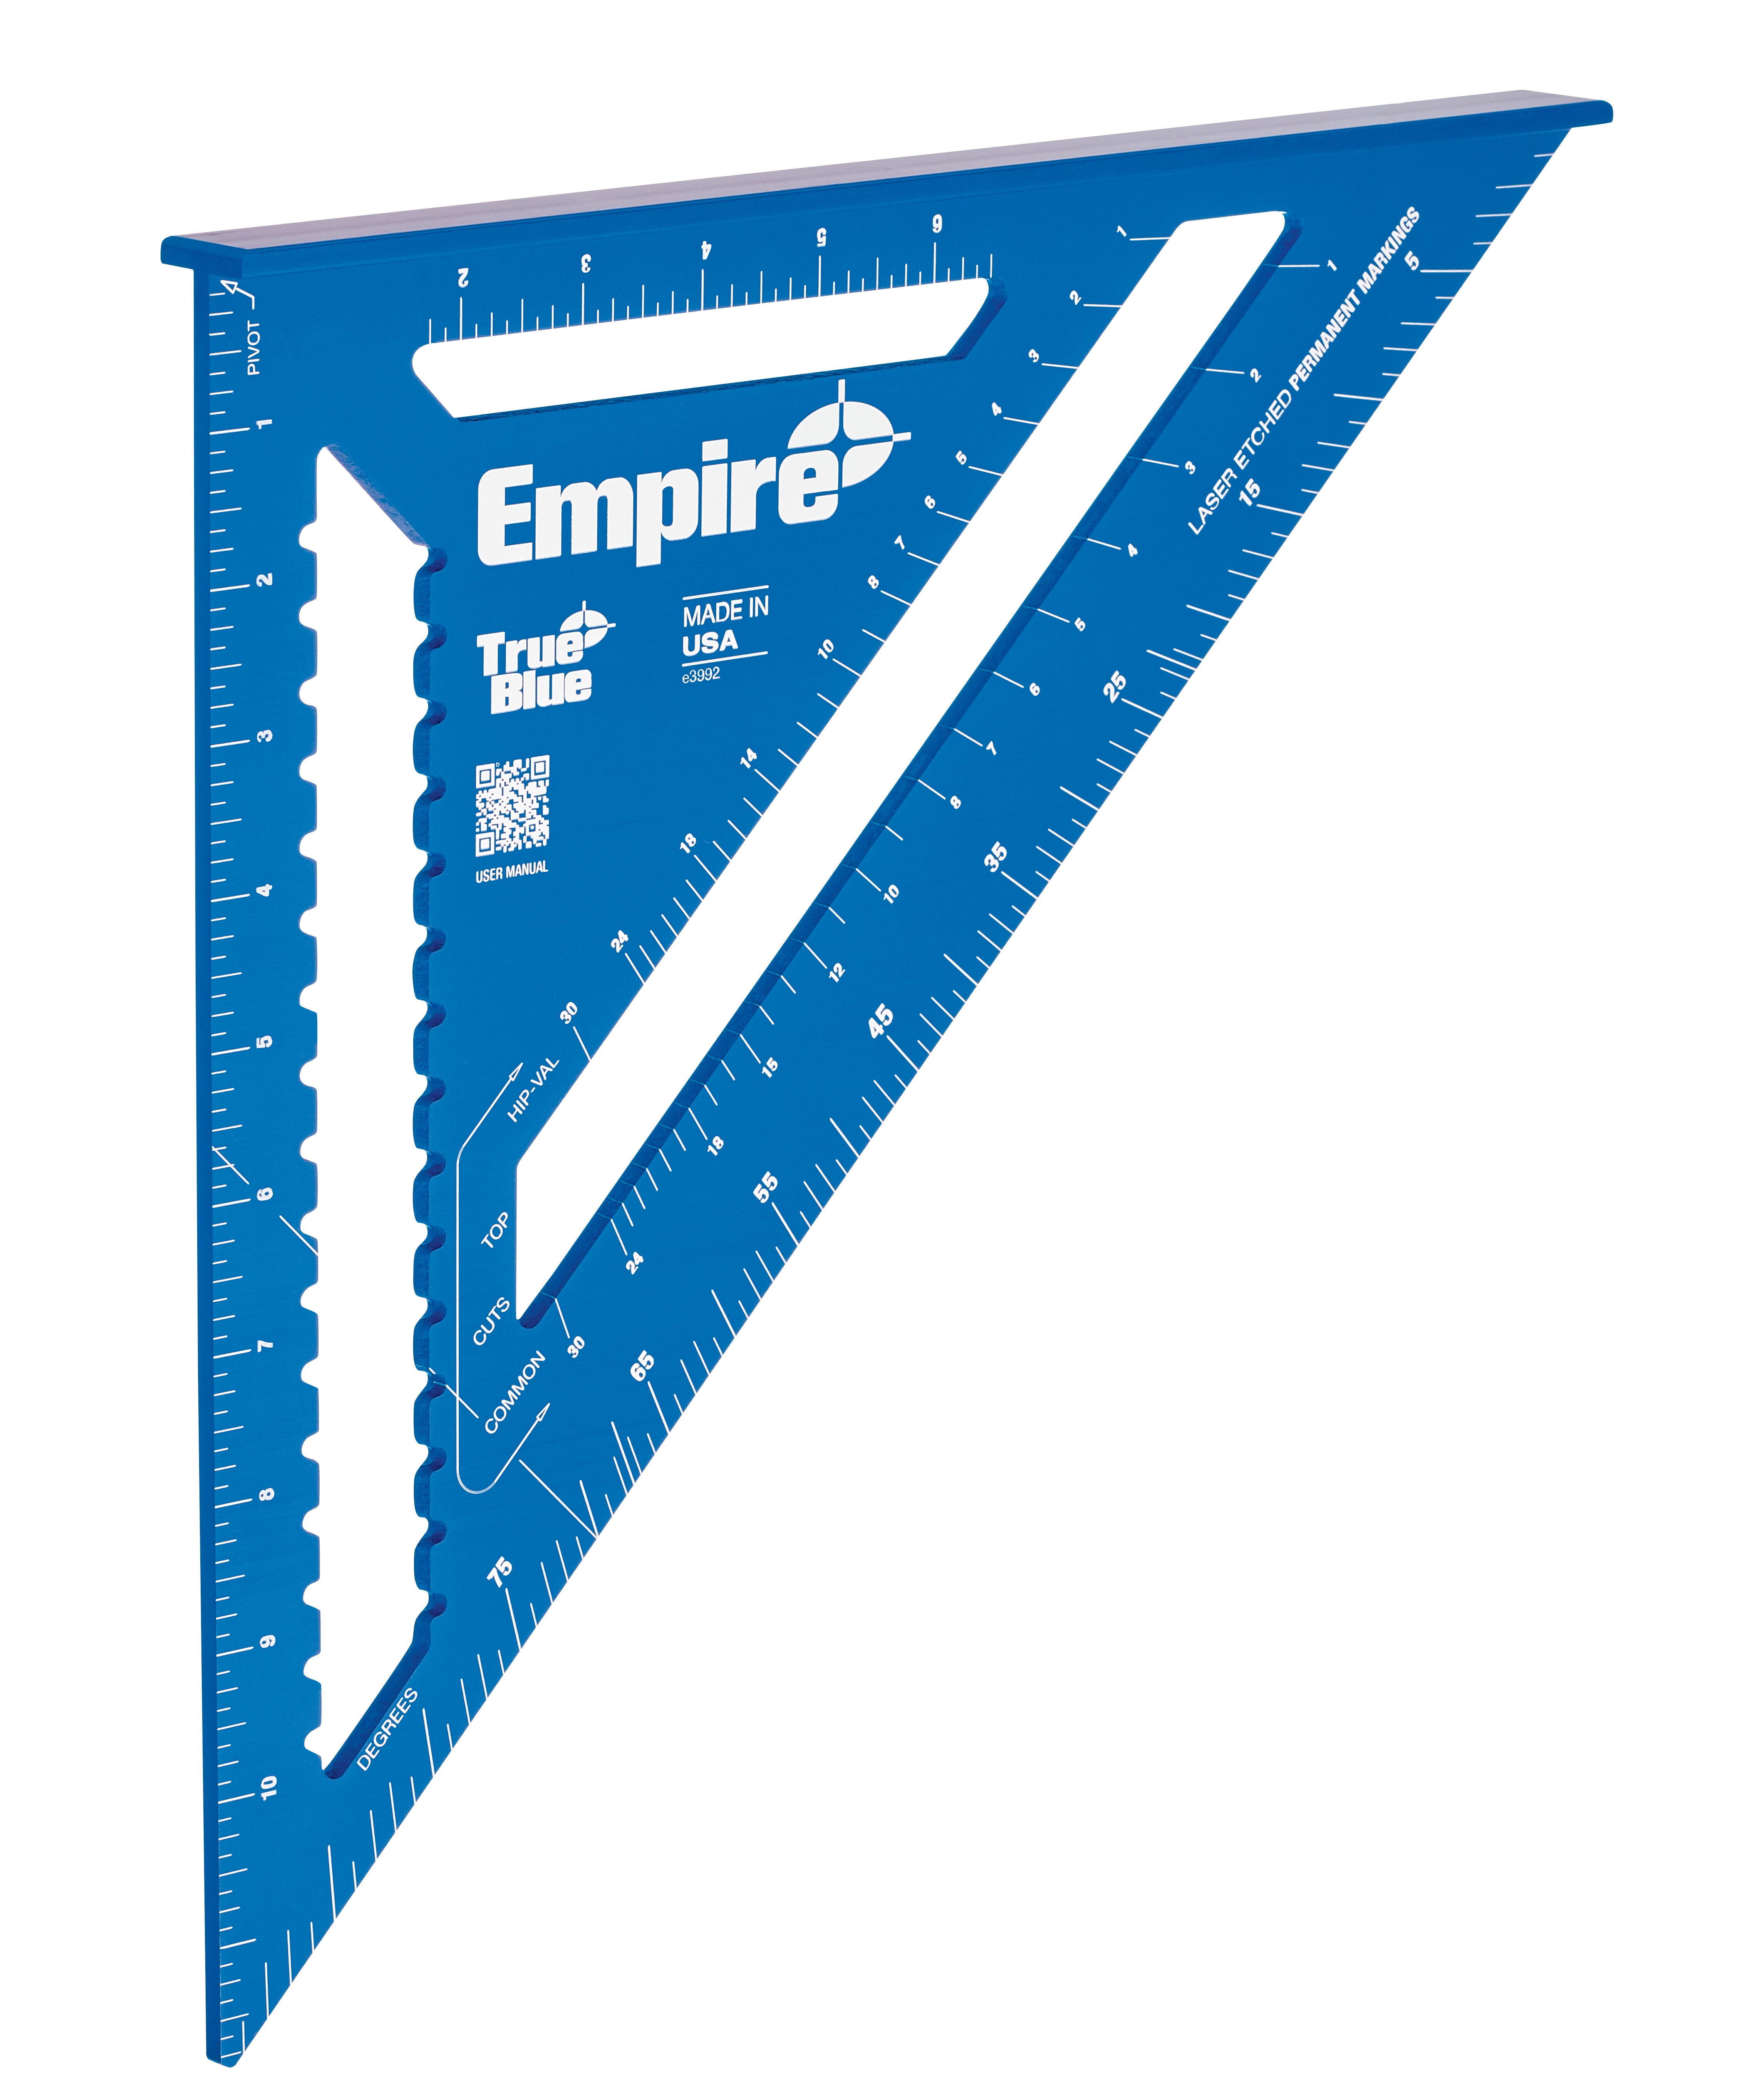 Milwaukee® Empire® True Blue® E3992 High Visibility Heavy Duty Rafter Square, 12 in L, 1/8 in Graduation, 12 in Tongue, Aluminum